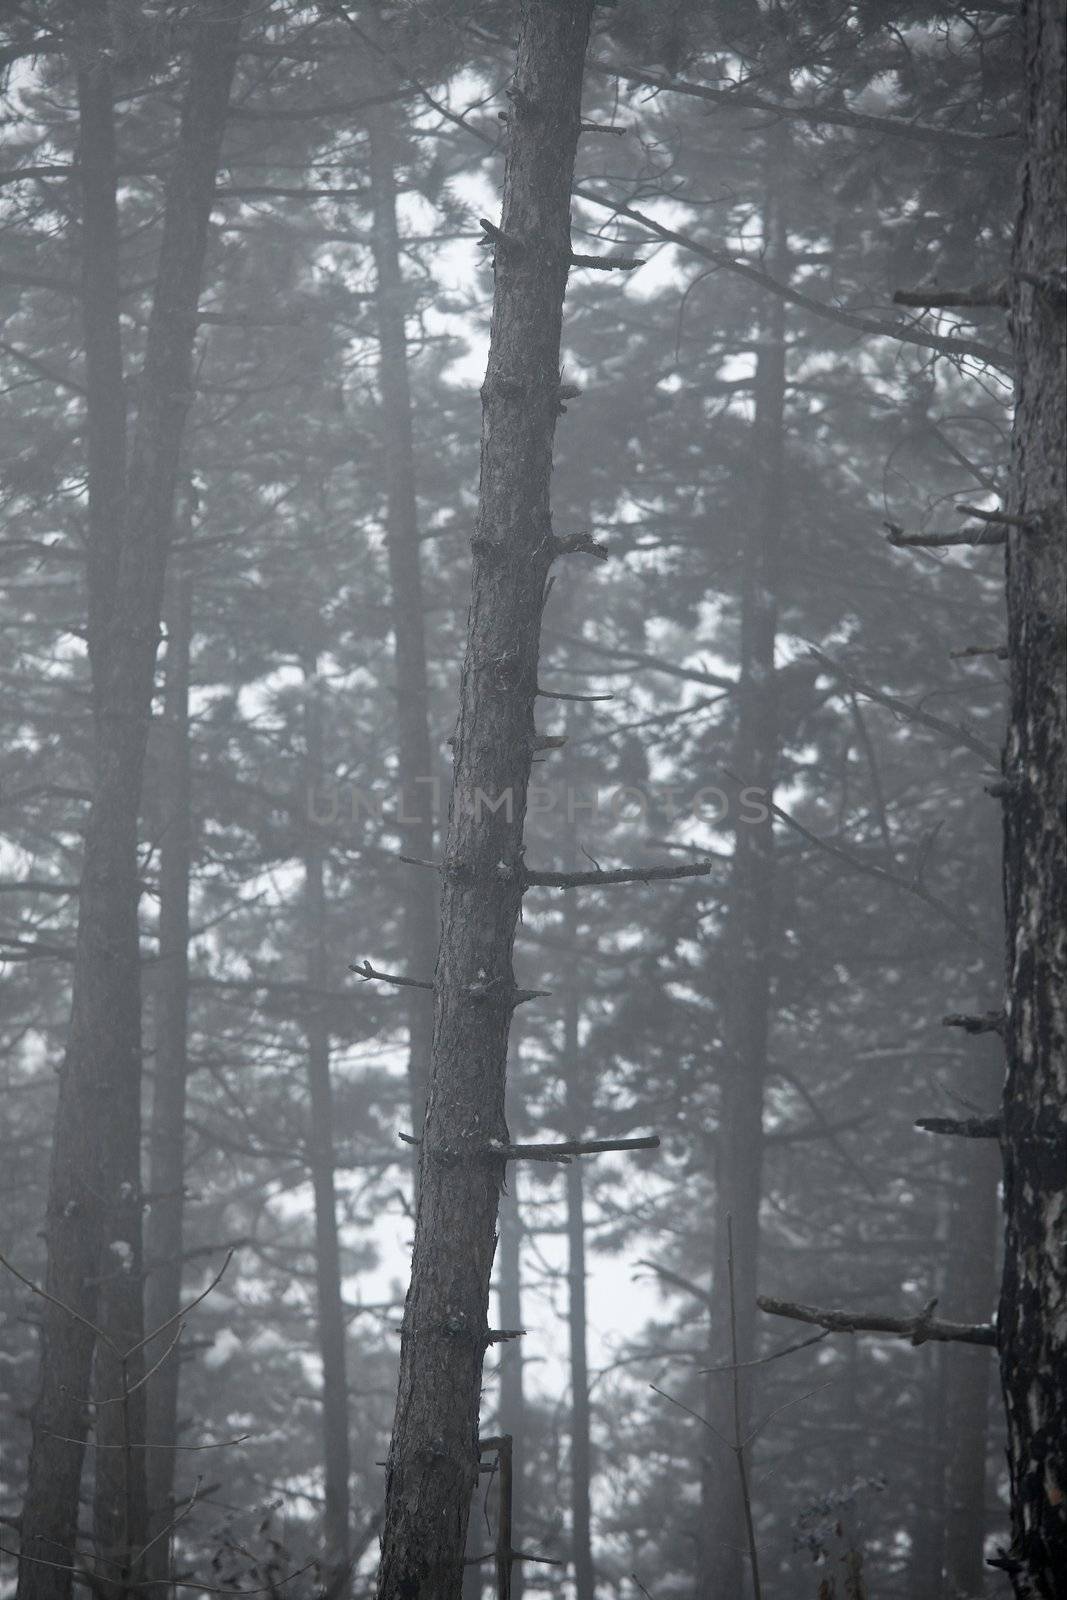 Gloomy winter forest detail with tall trees